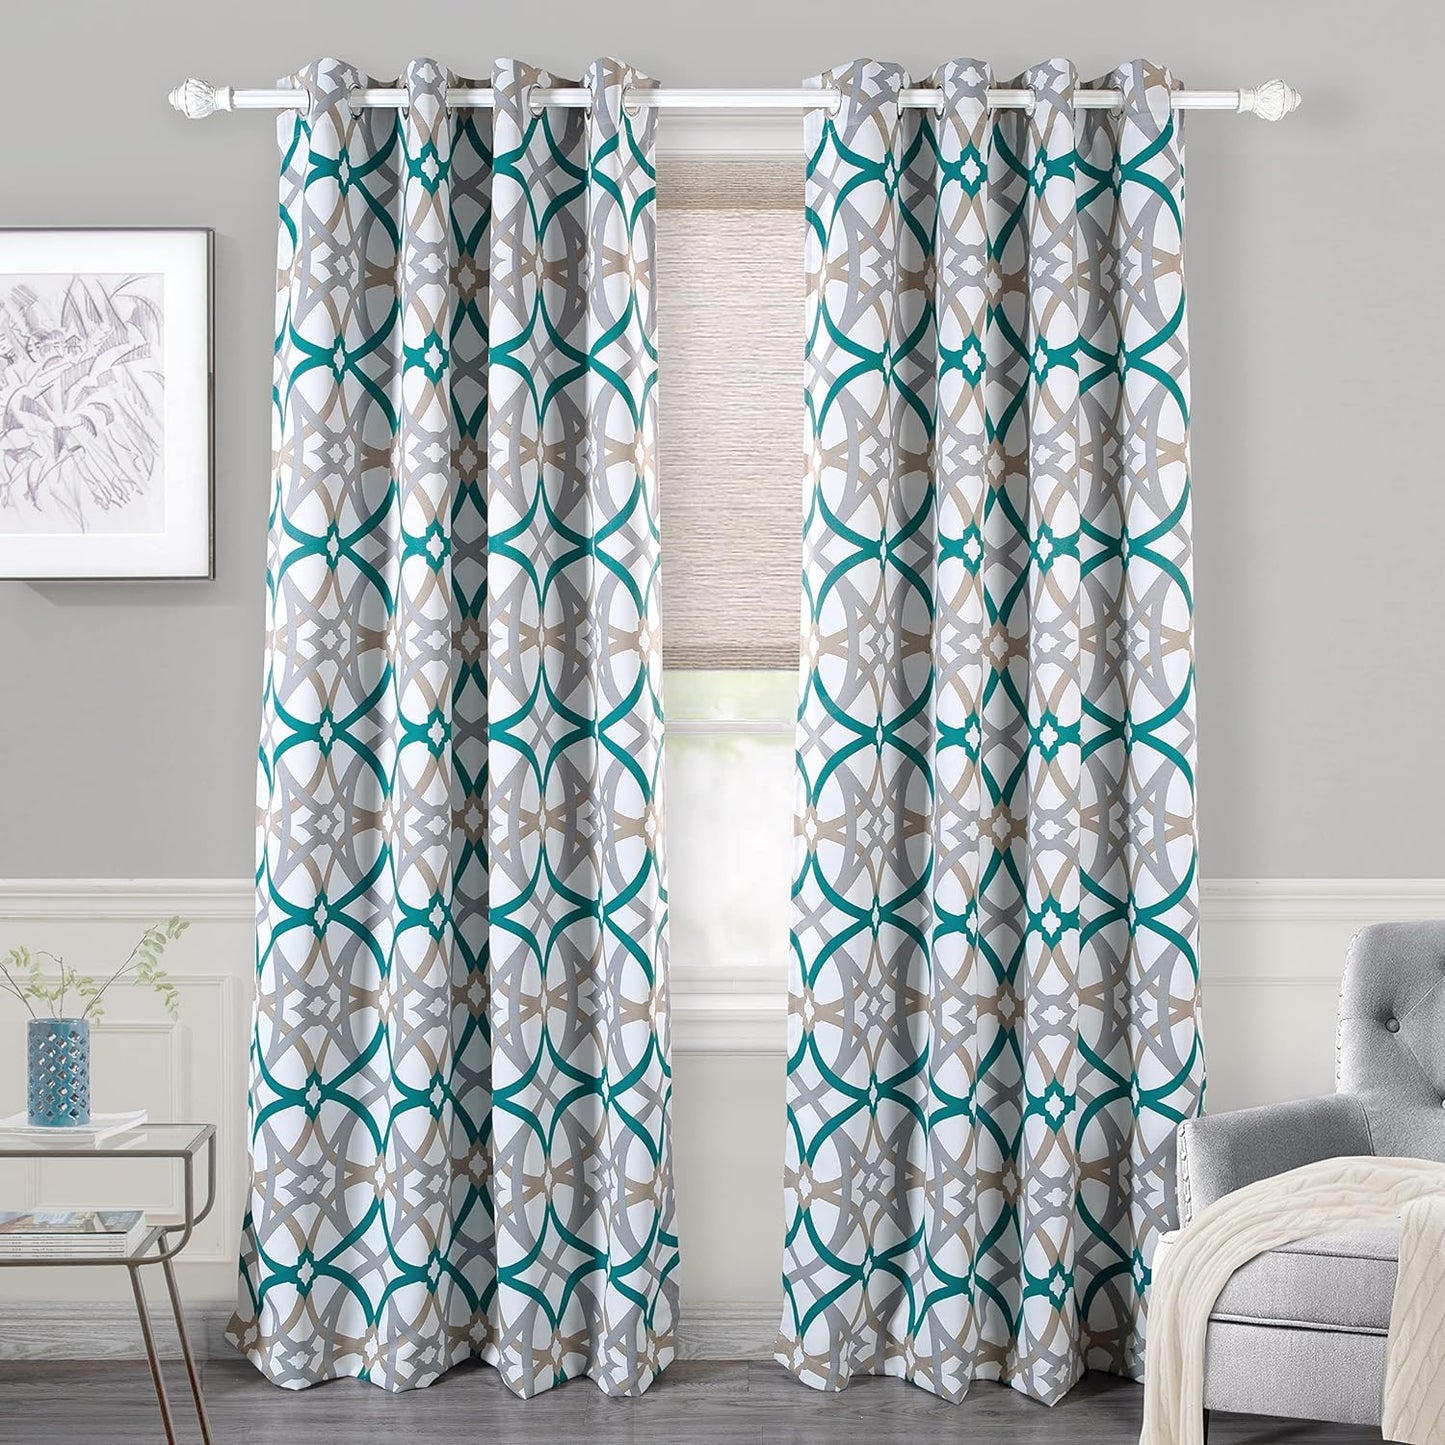 Driftaway Alexander Thermal Blackout Grommet Unlined Window Curtains Spiral Geo Trellis Pattern Set of 2 Panels Each Size 52 Inch by 84 Inch Red and Gray  DriftAway Teal 52"X84" 